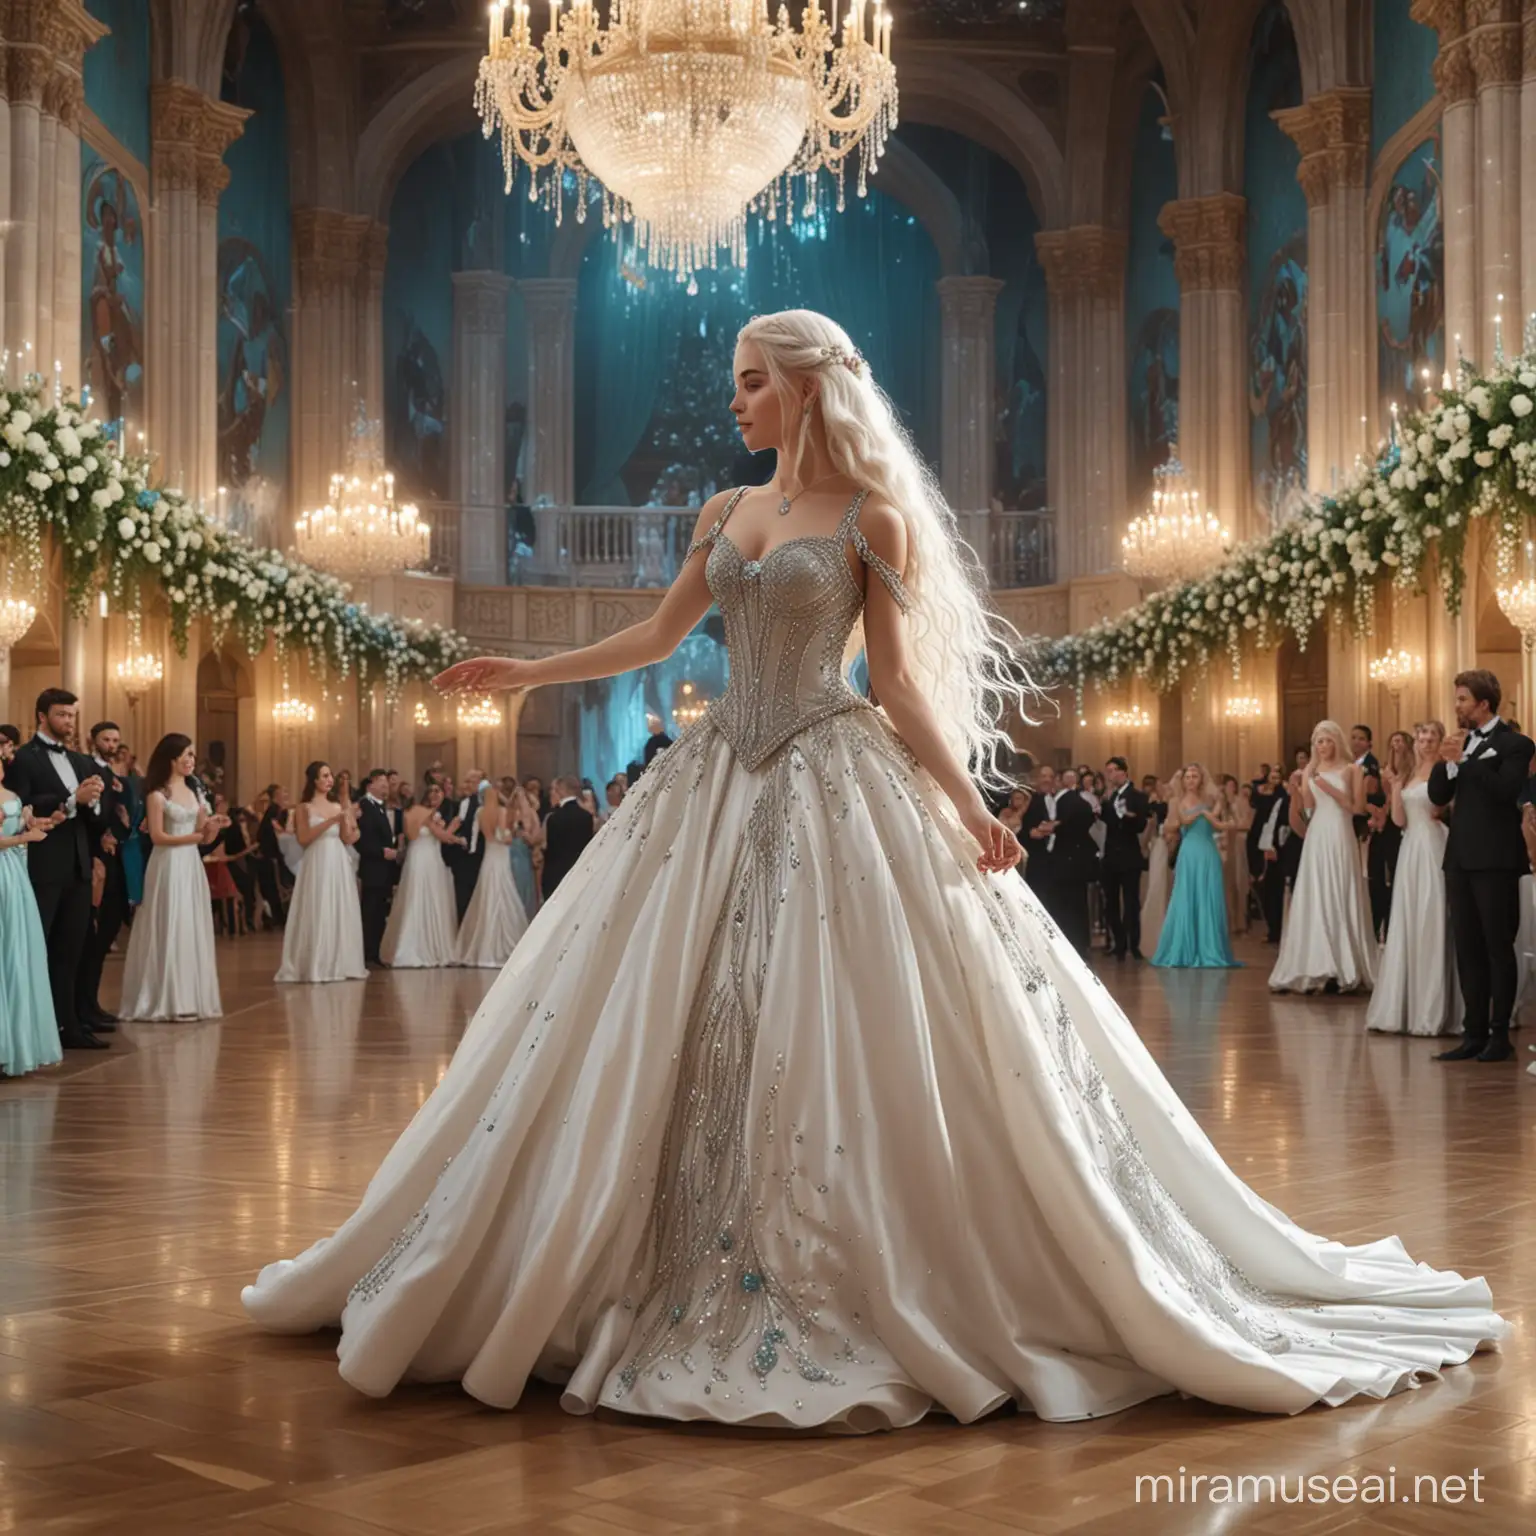 Elegant WhiteHaired Woman Dances with Prince in Turquoise Ballroom